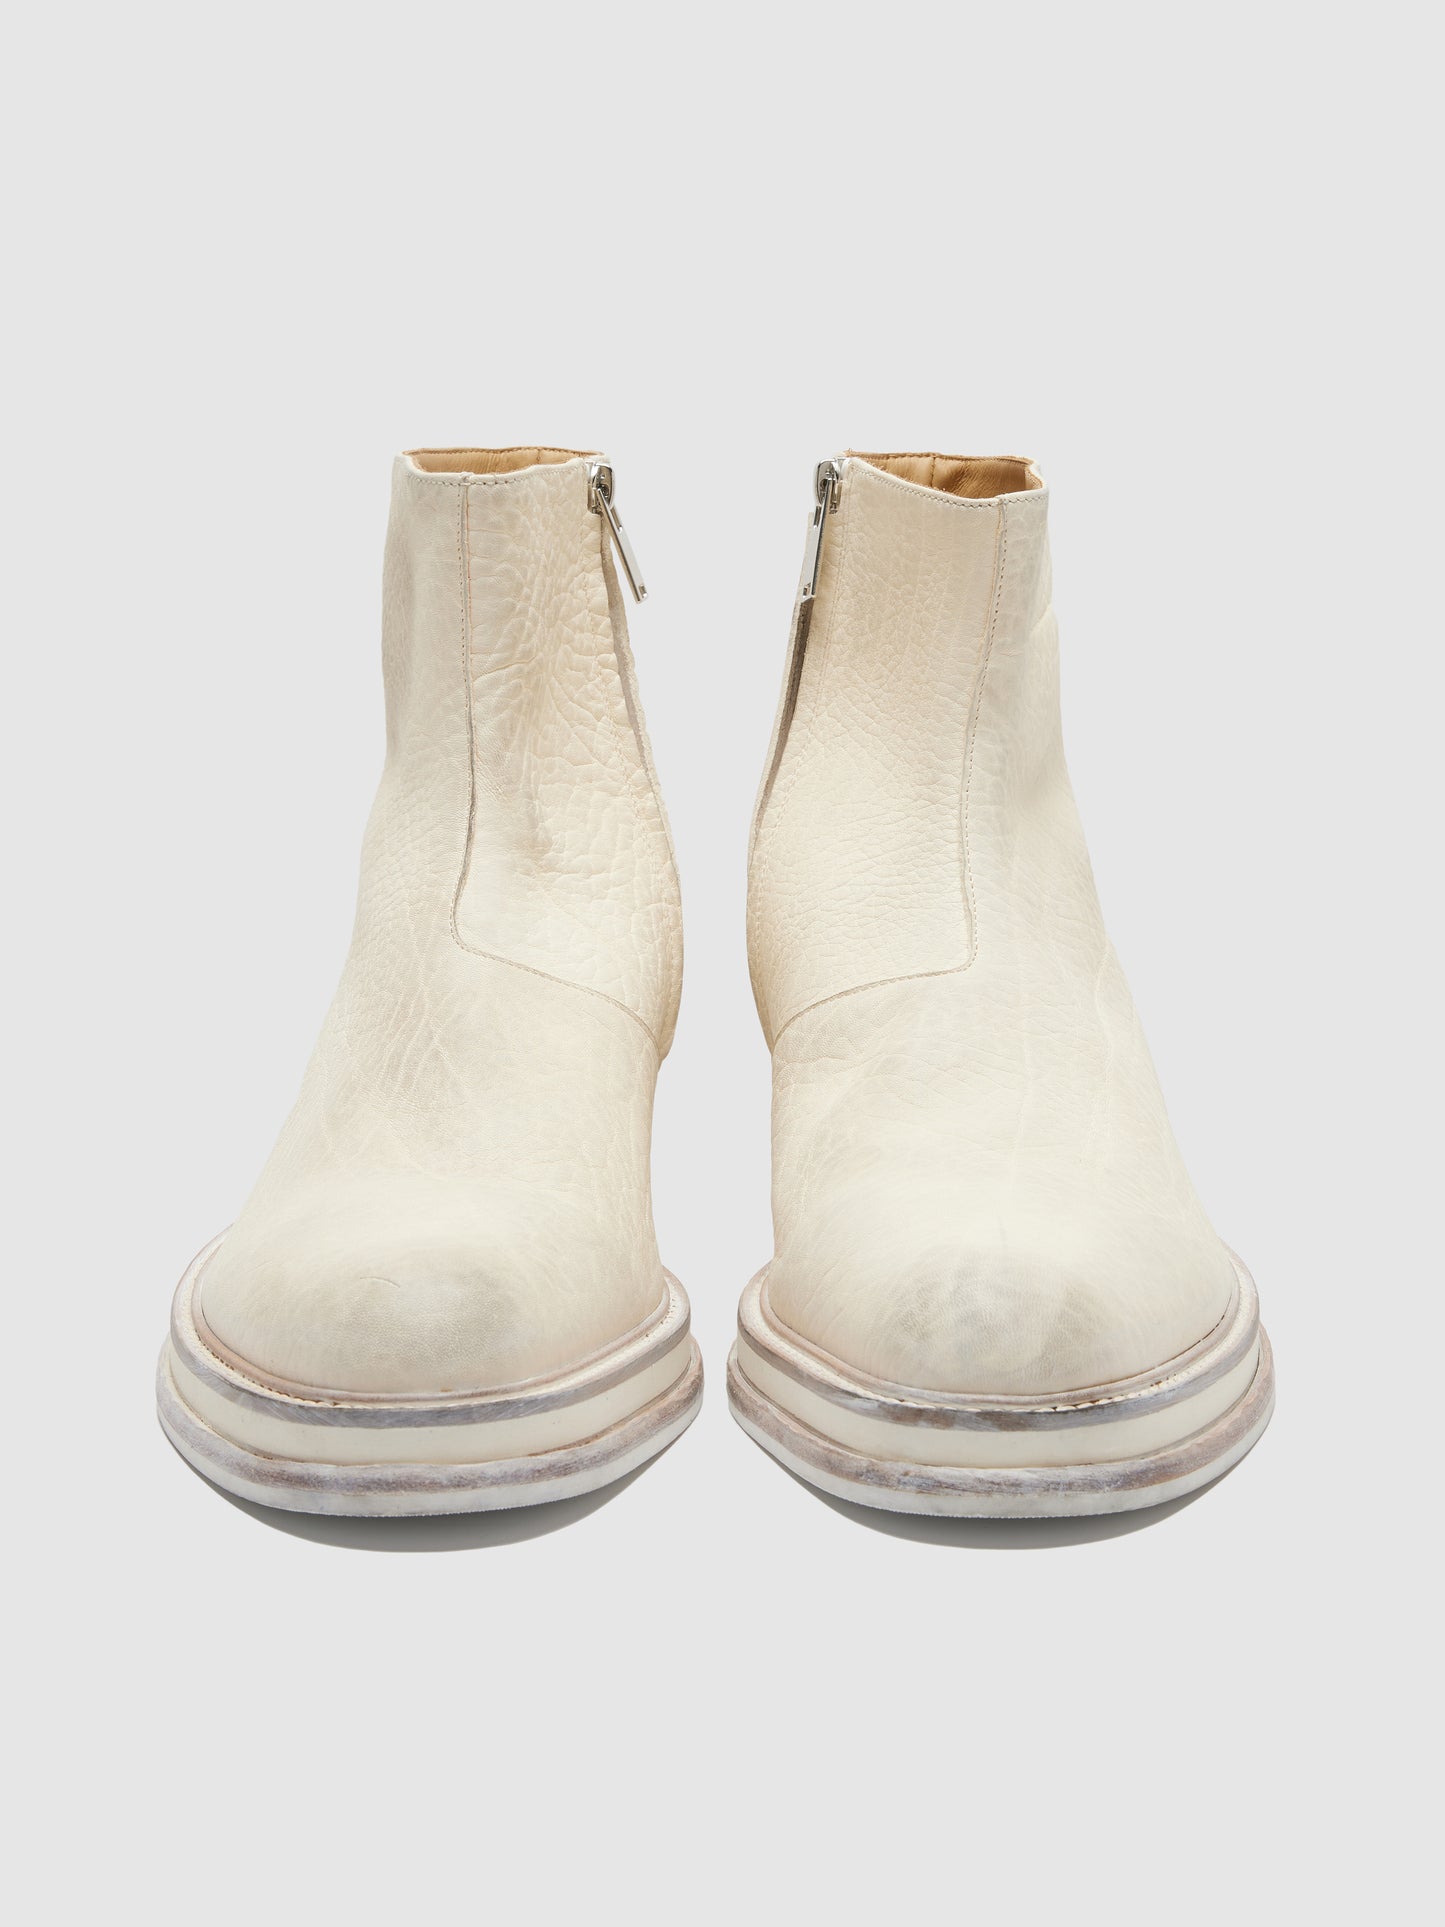 OFF WHITE COWBOY BOOTS WITH DIRTY WASHING